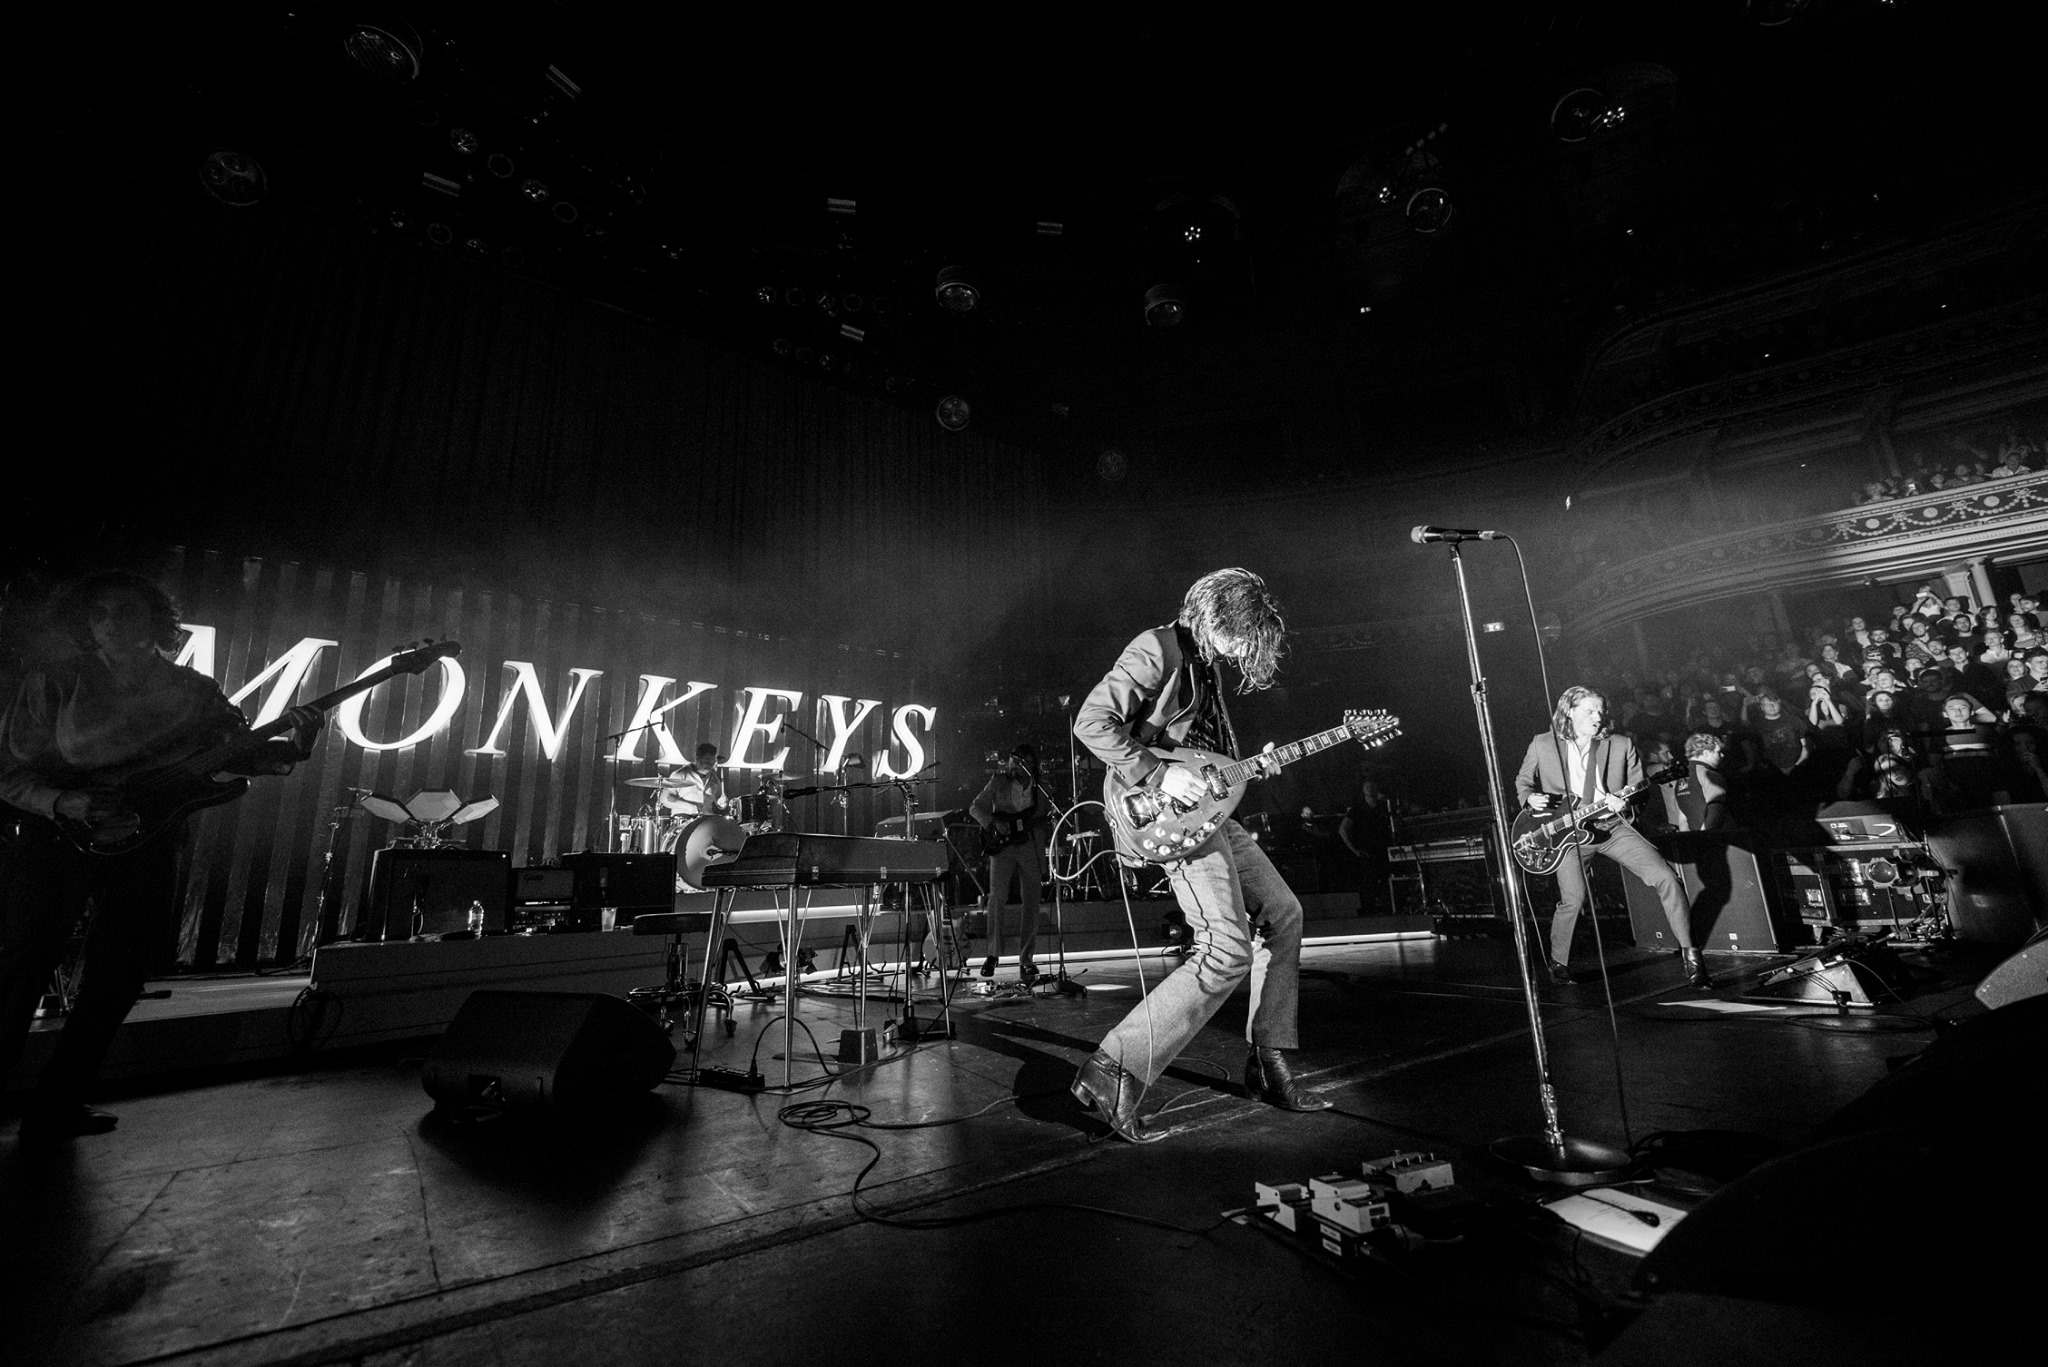 Arctic Monkeys add second Melbourne show due to overwhelming demand